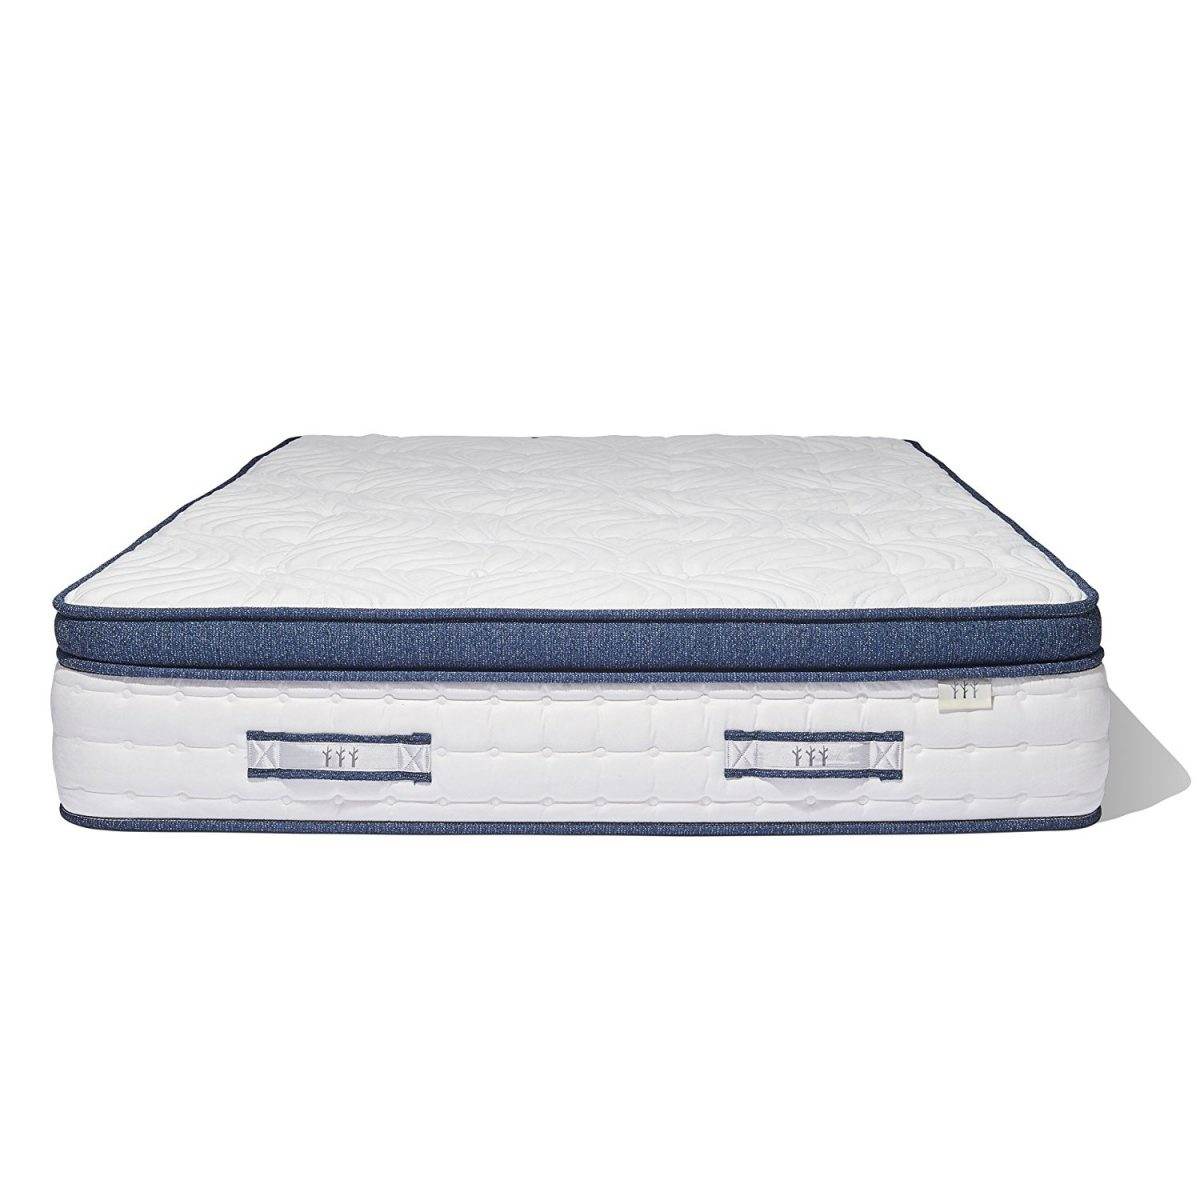 The Brentwood Home Oceano Wrapped Innerspring Mattress